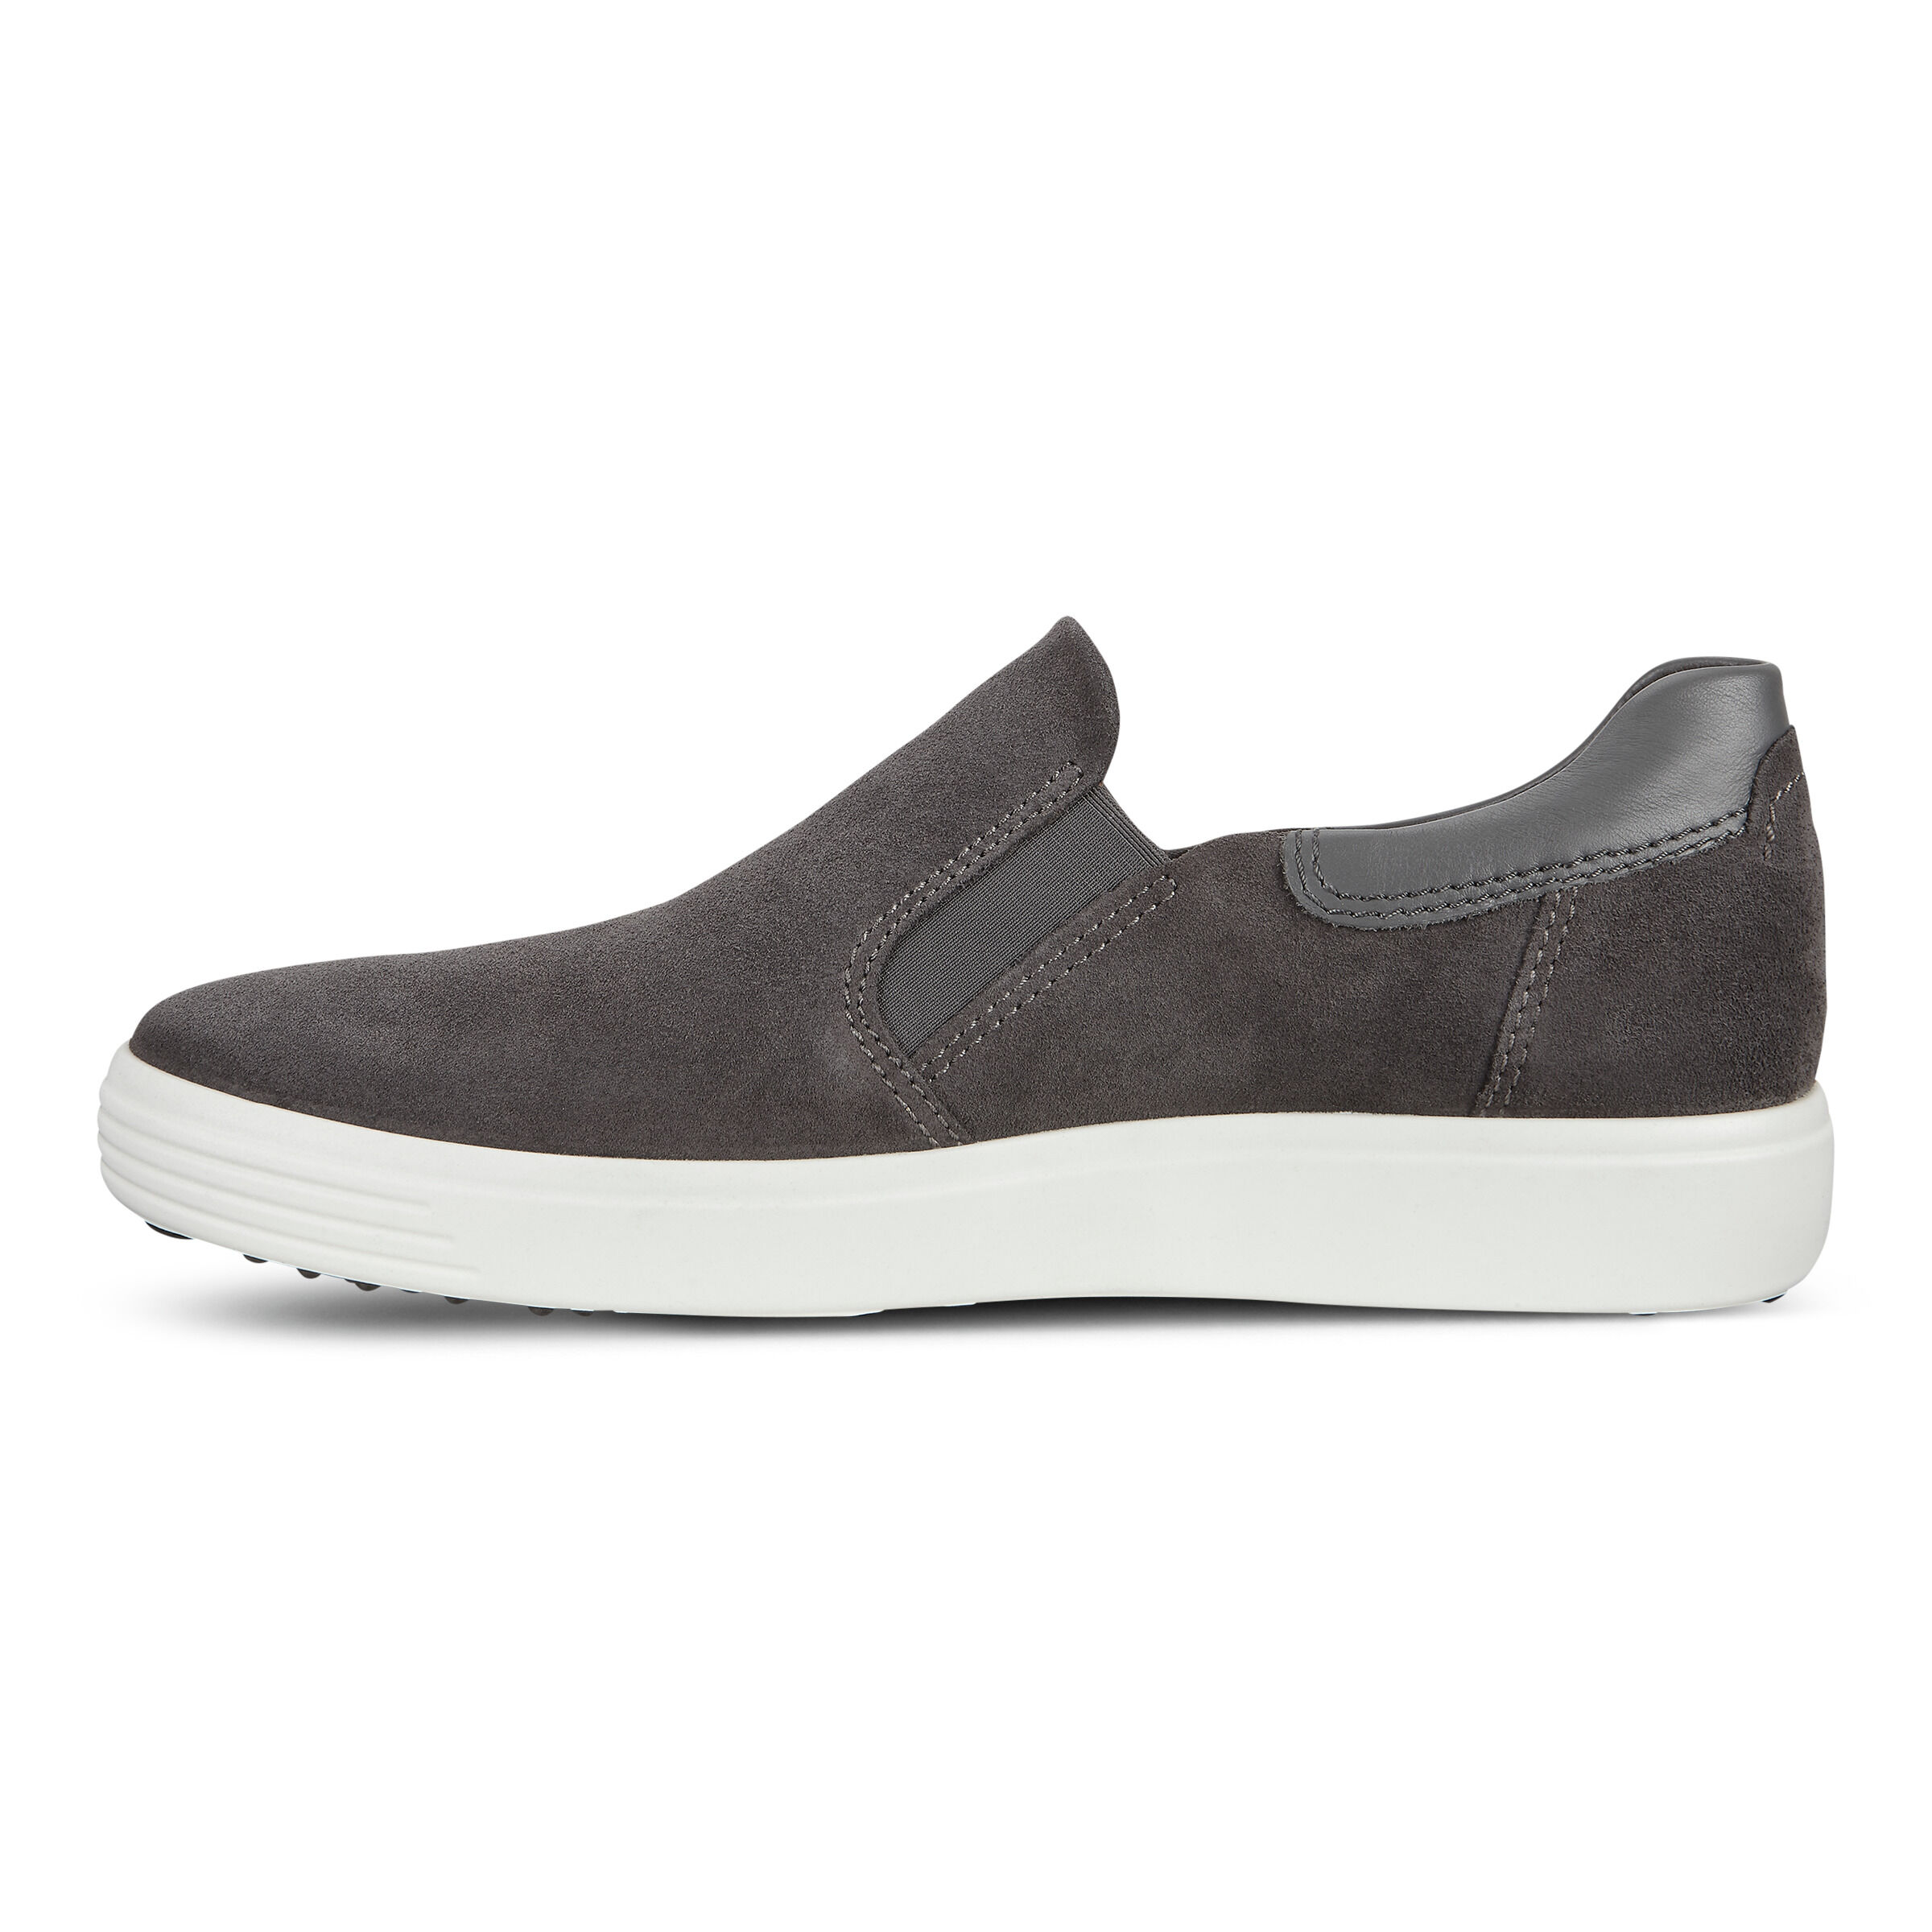 ecco mens slip on casual shoes